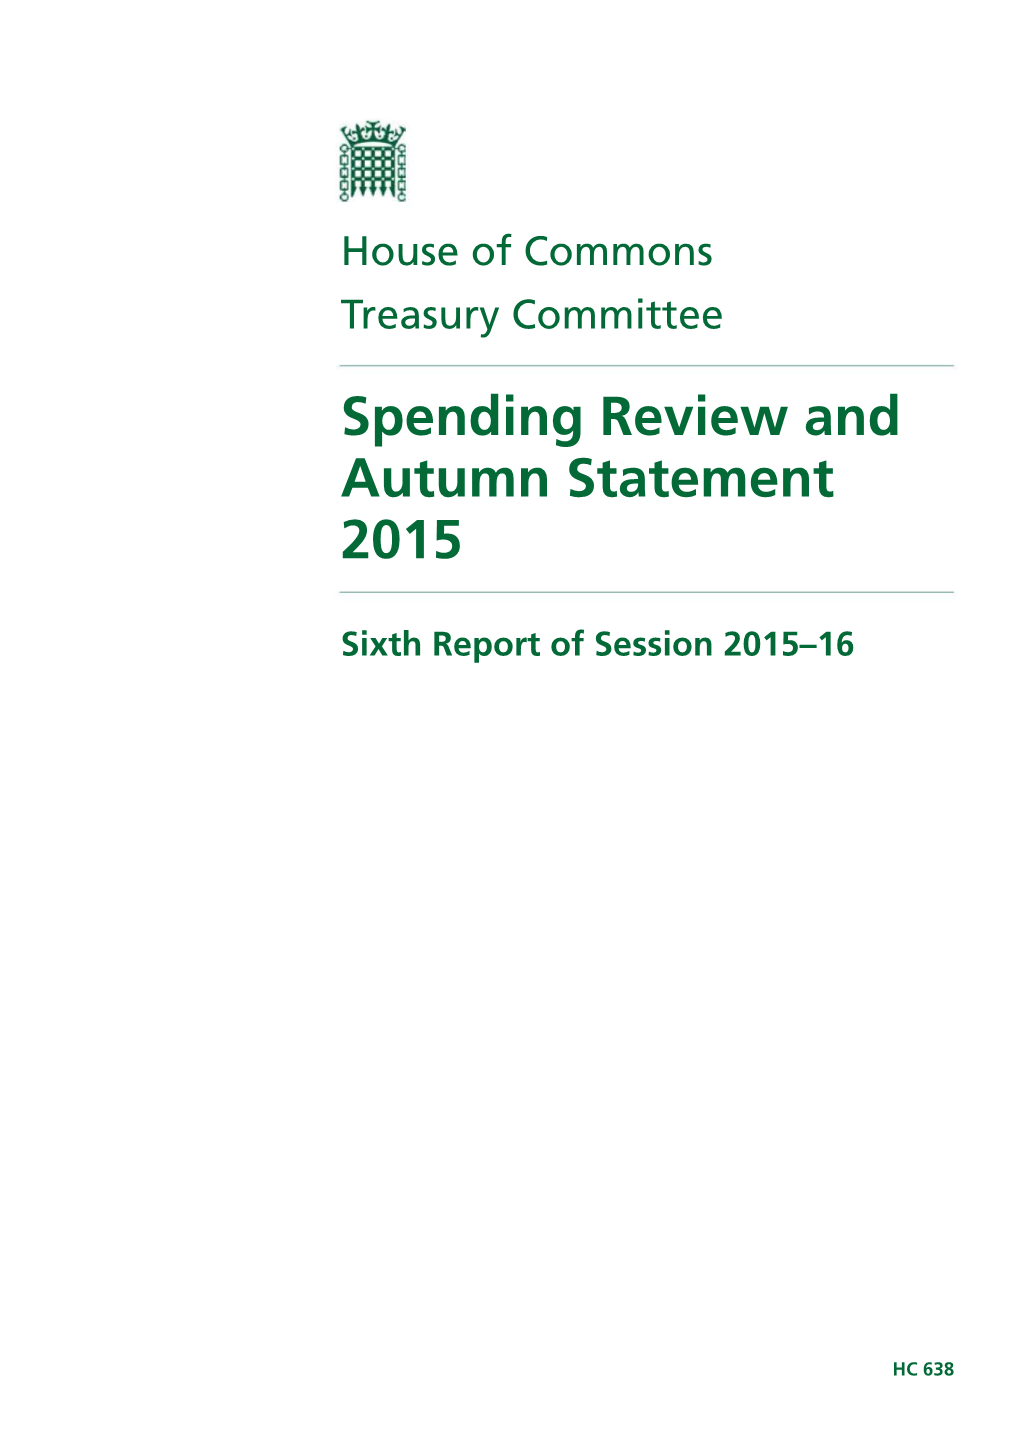 Spending Review and Autumn Statement 2015